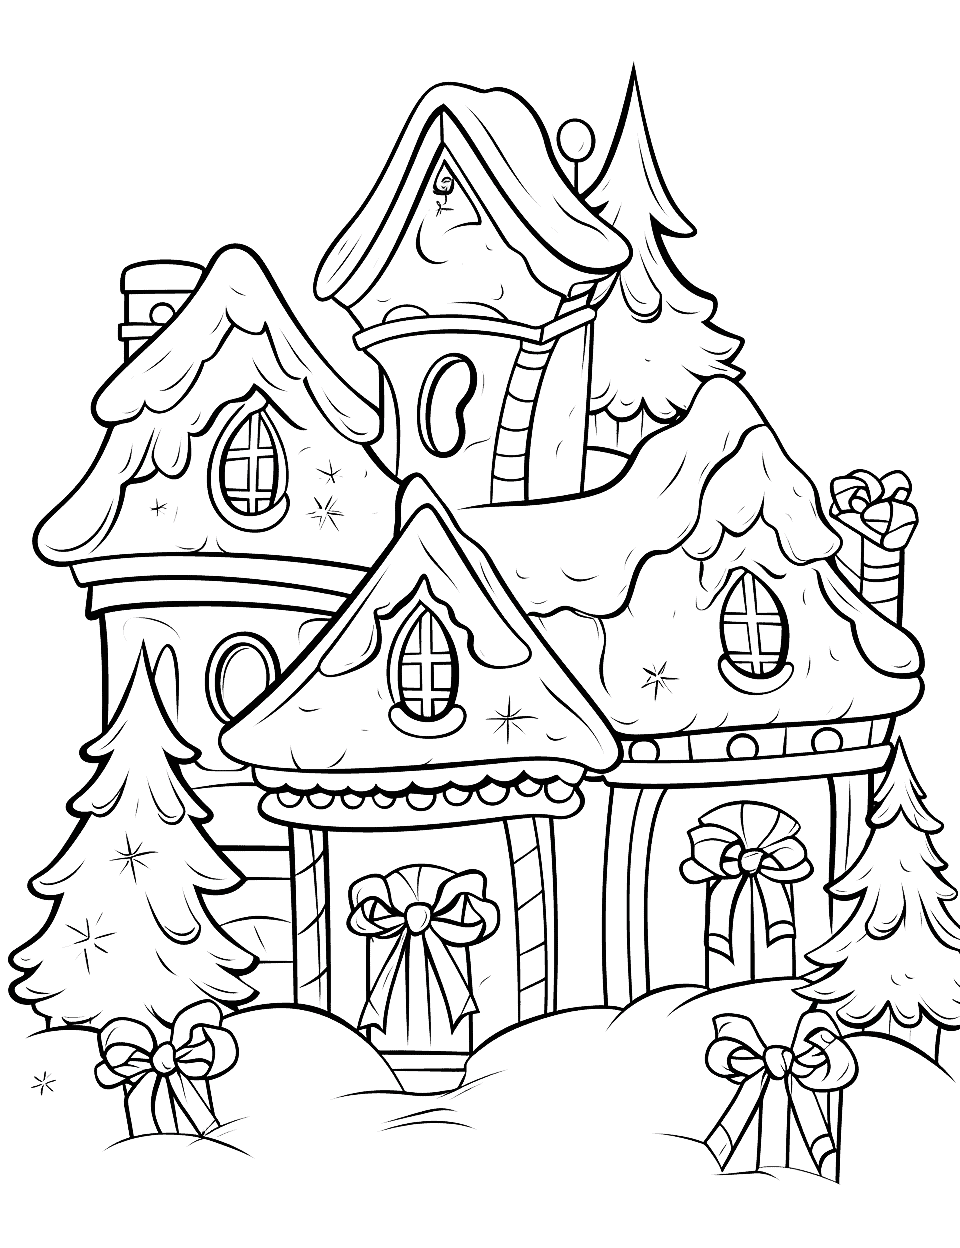 Difficult Christmas House Coloring Page - A detailed Christmas house scene requiring more precision to color, suitable for older children.